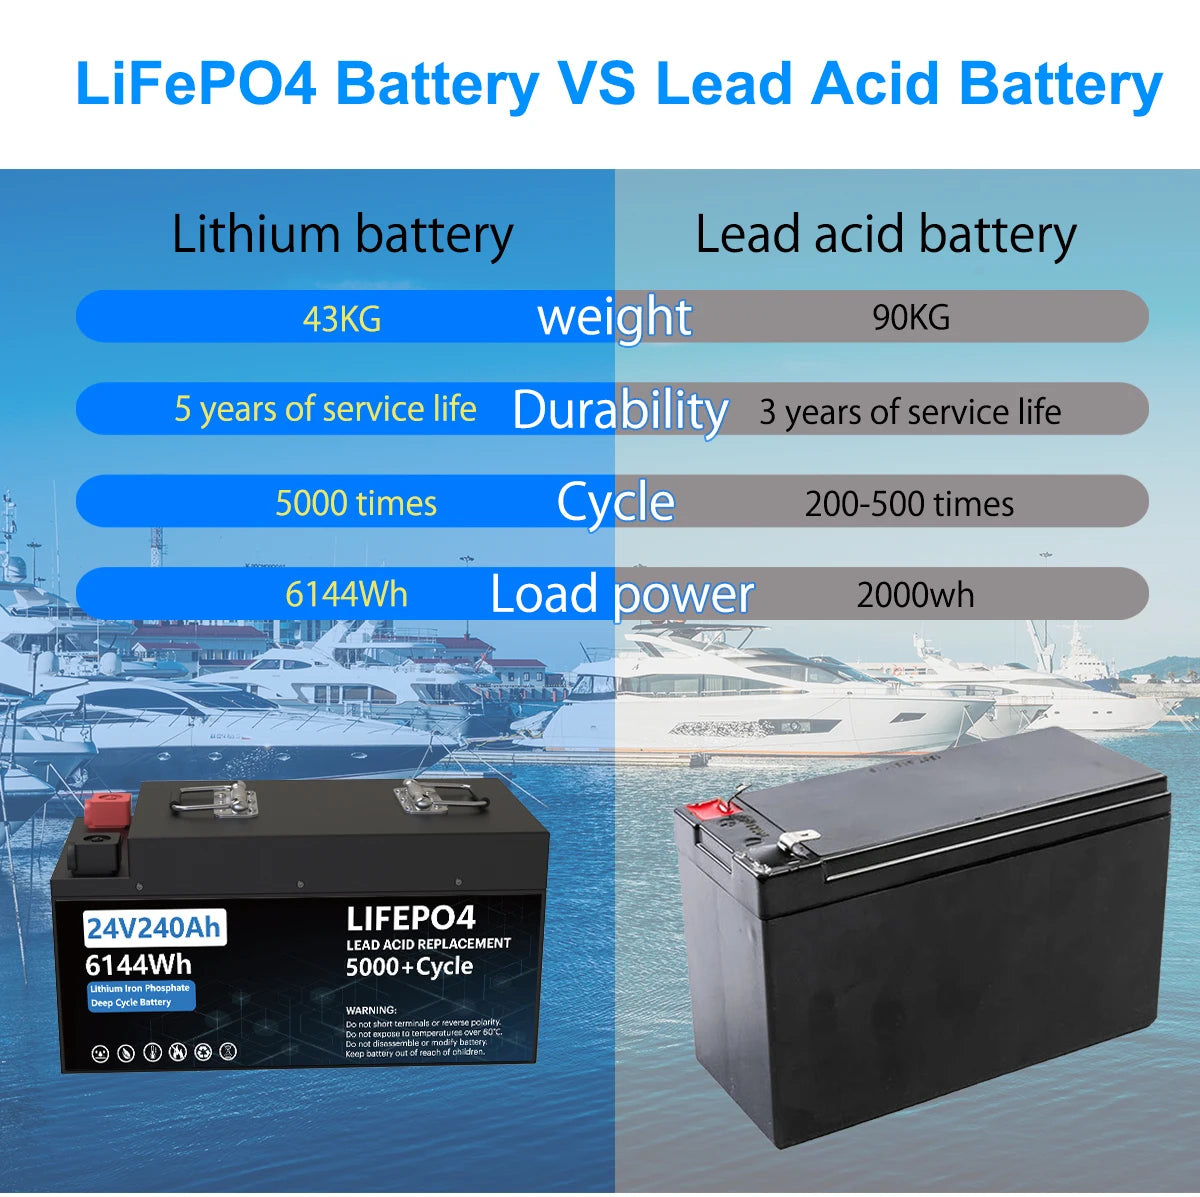 LiFePO4 24V 200AH Battery, **Compare LiFePO4 and Lead Acid Batteries:**